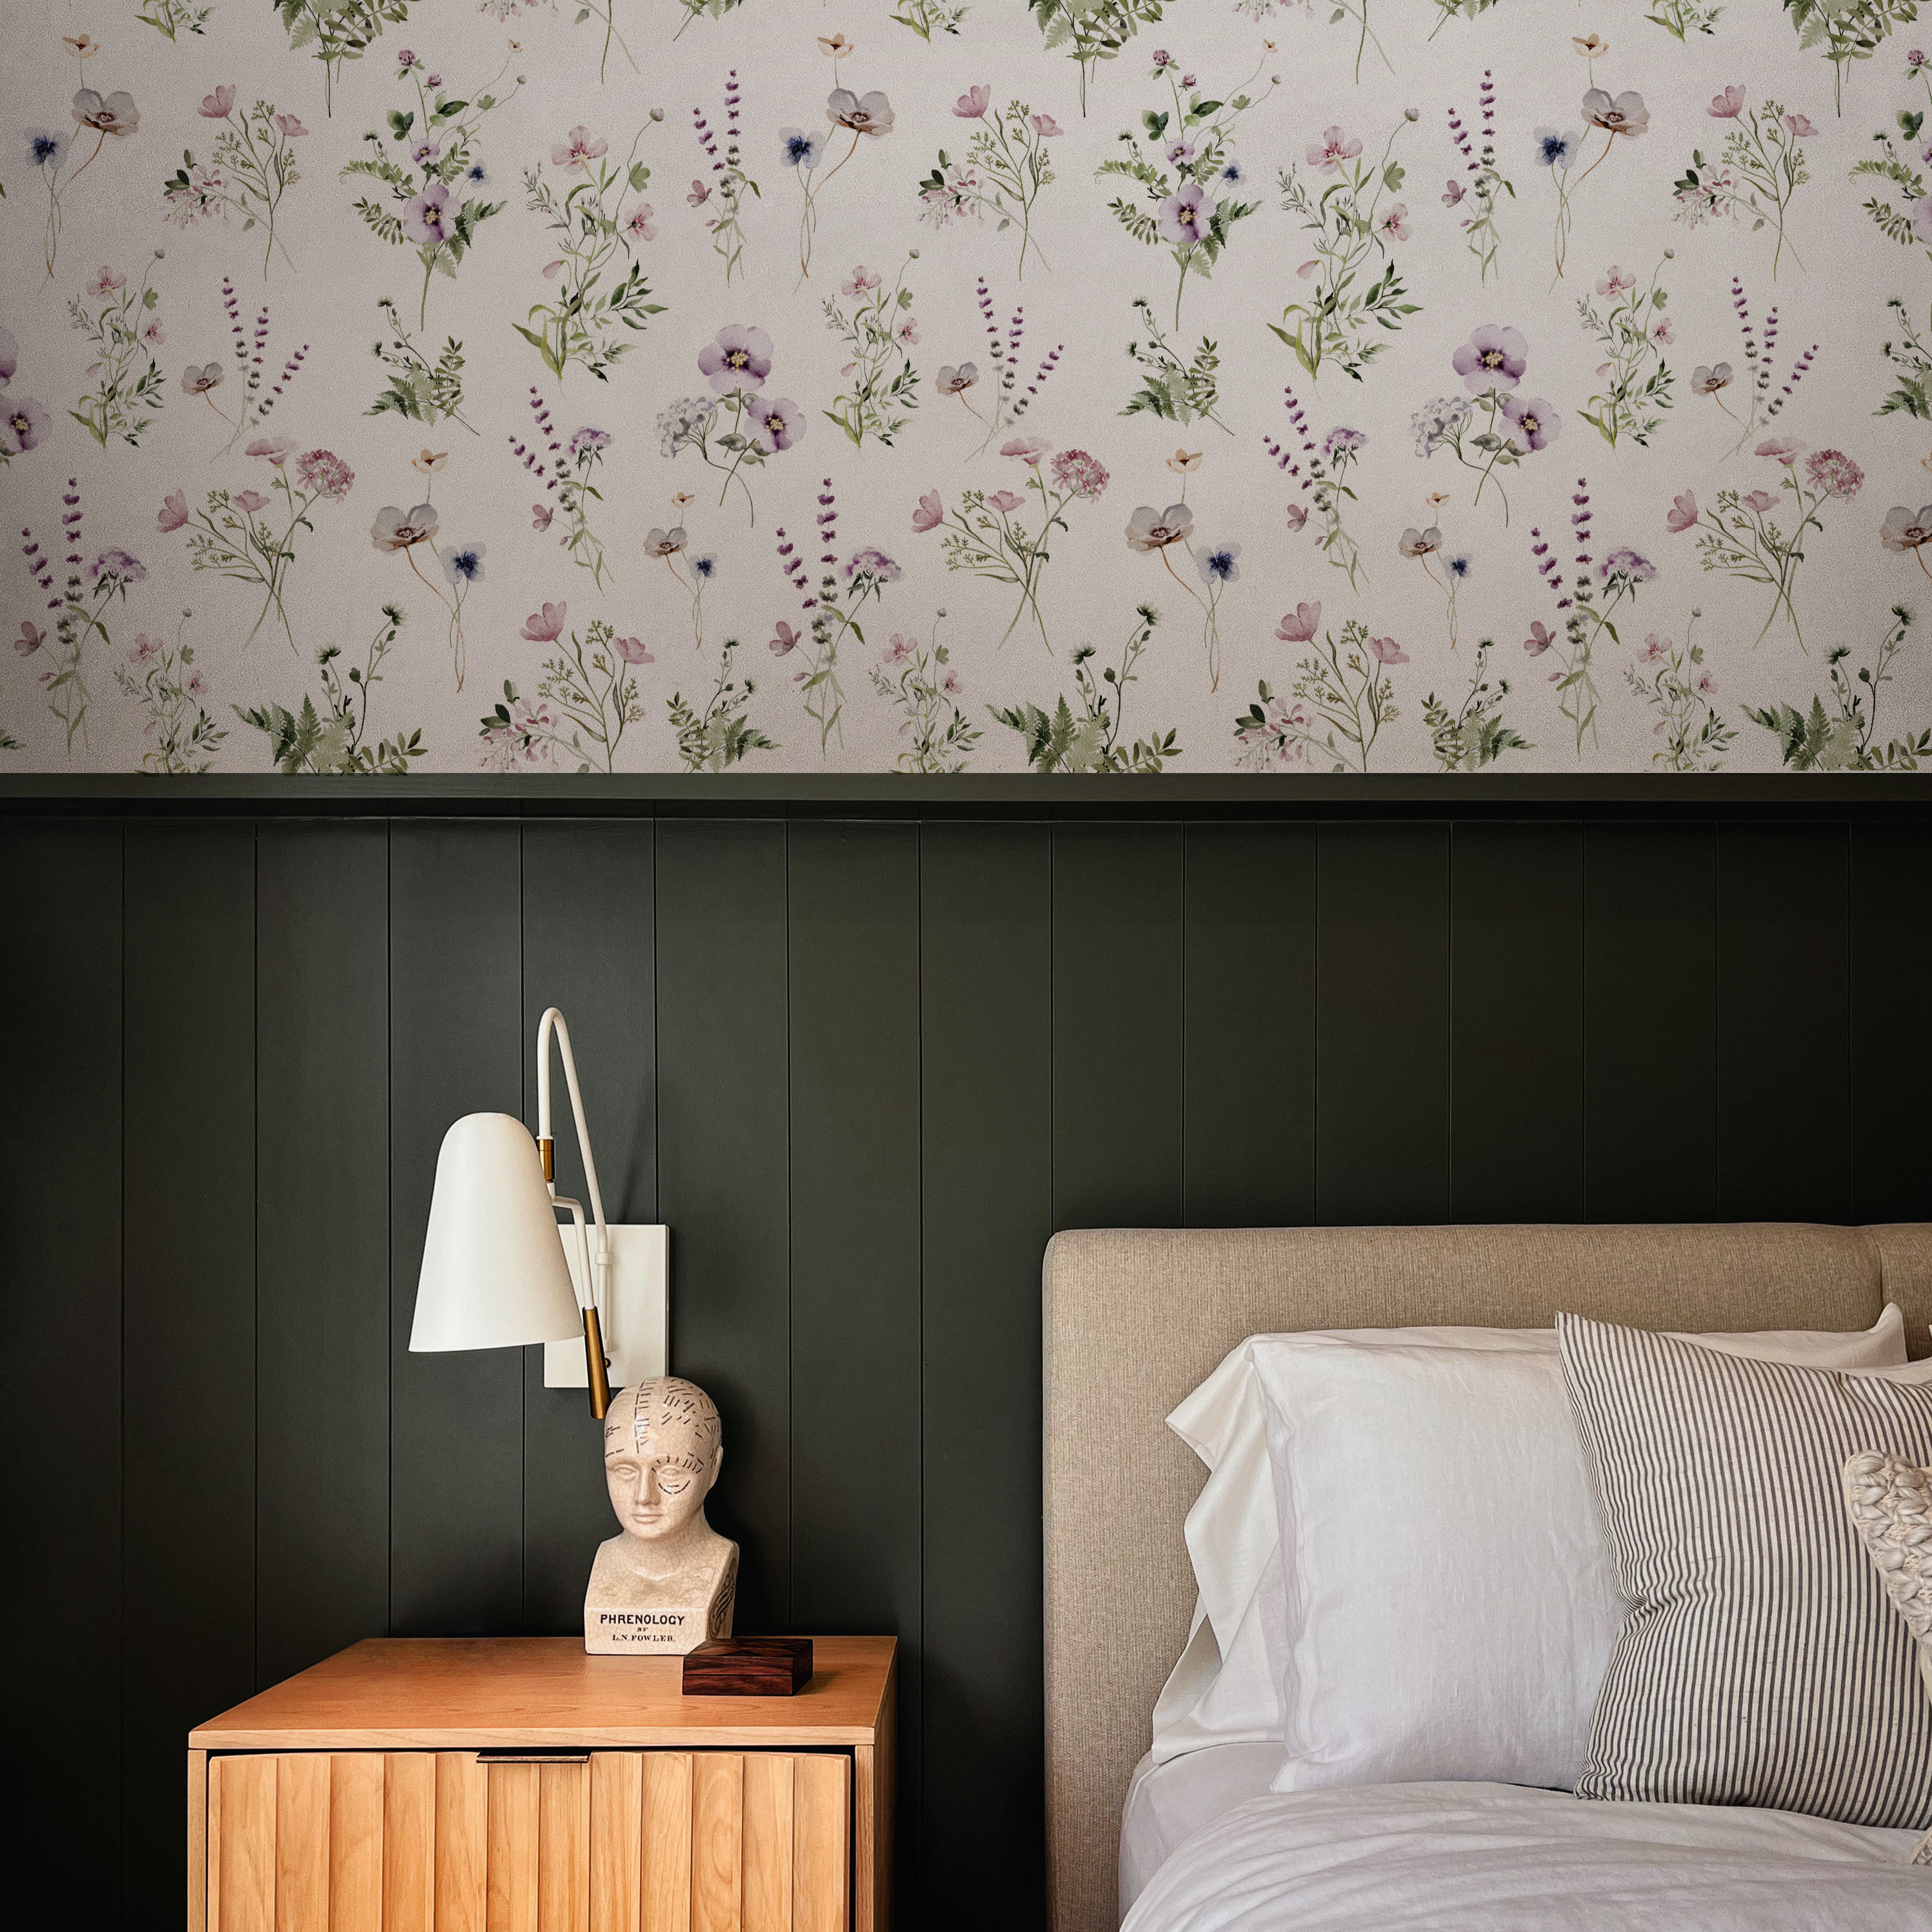 A section of a bedroom showing the 'Midsummer Watercolour Bouquet Wallpaper - Raspberry' with delicate watercolor wildflowers in shades of purple and green, above a dark green wainscoting. Beside the bed, a modern lamp illuminates a wooden nightstand featuring a phrenology head decor piece, contributing to the room's chic and eclectic style